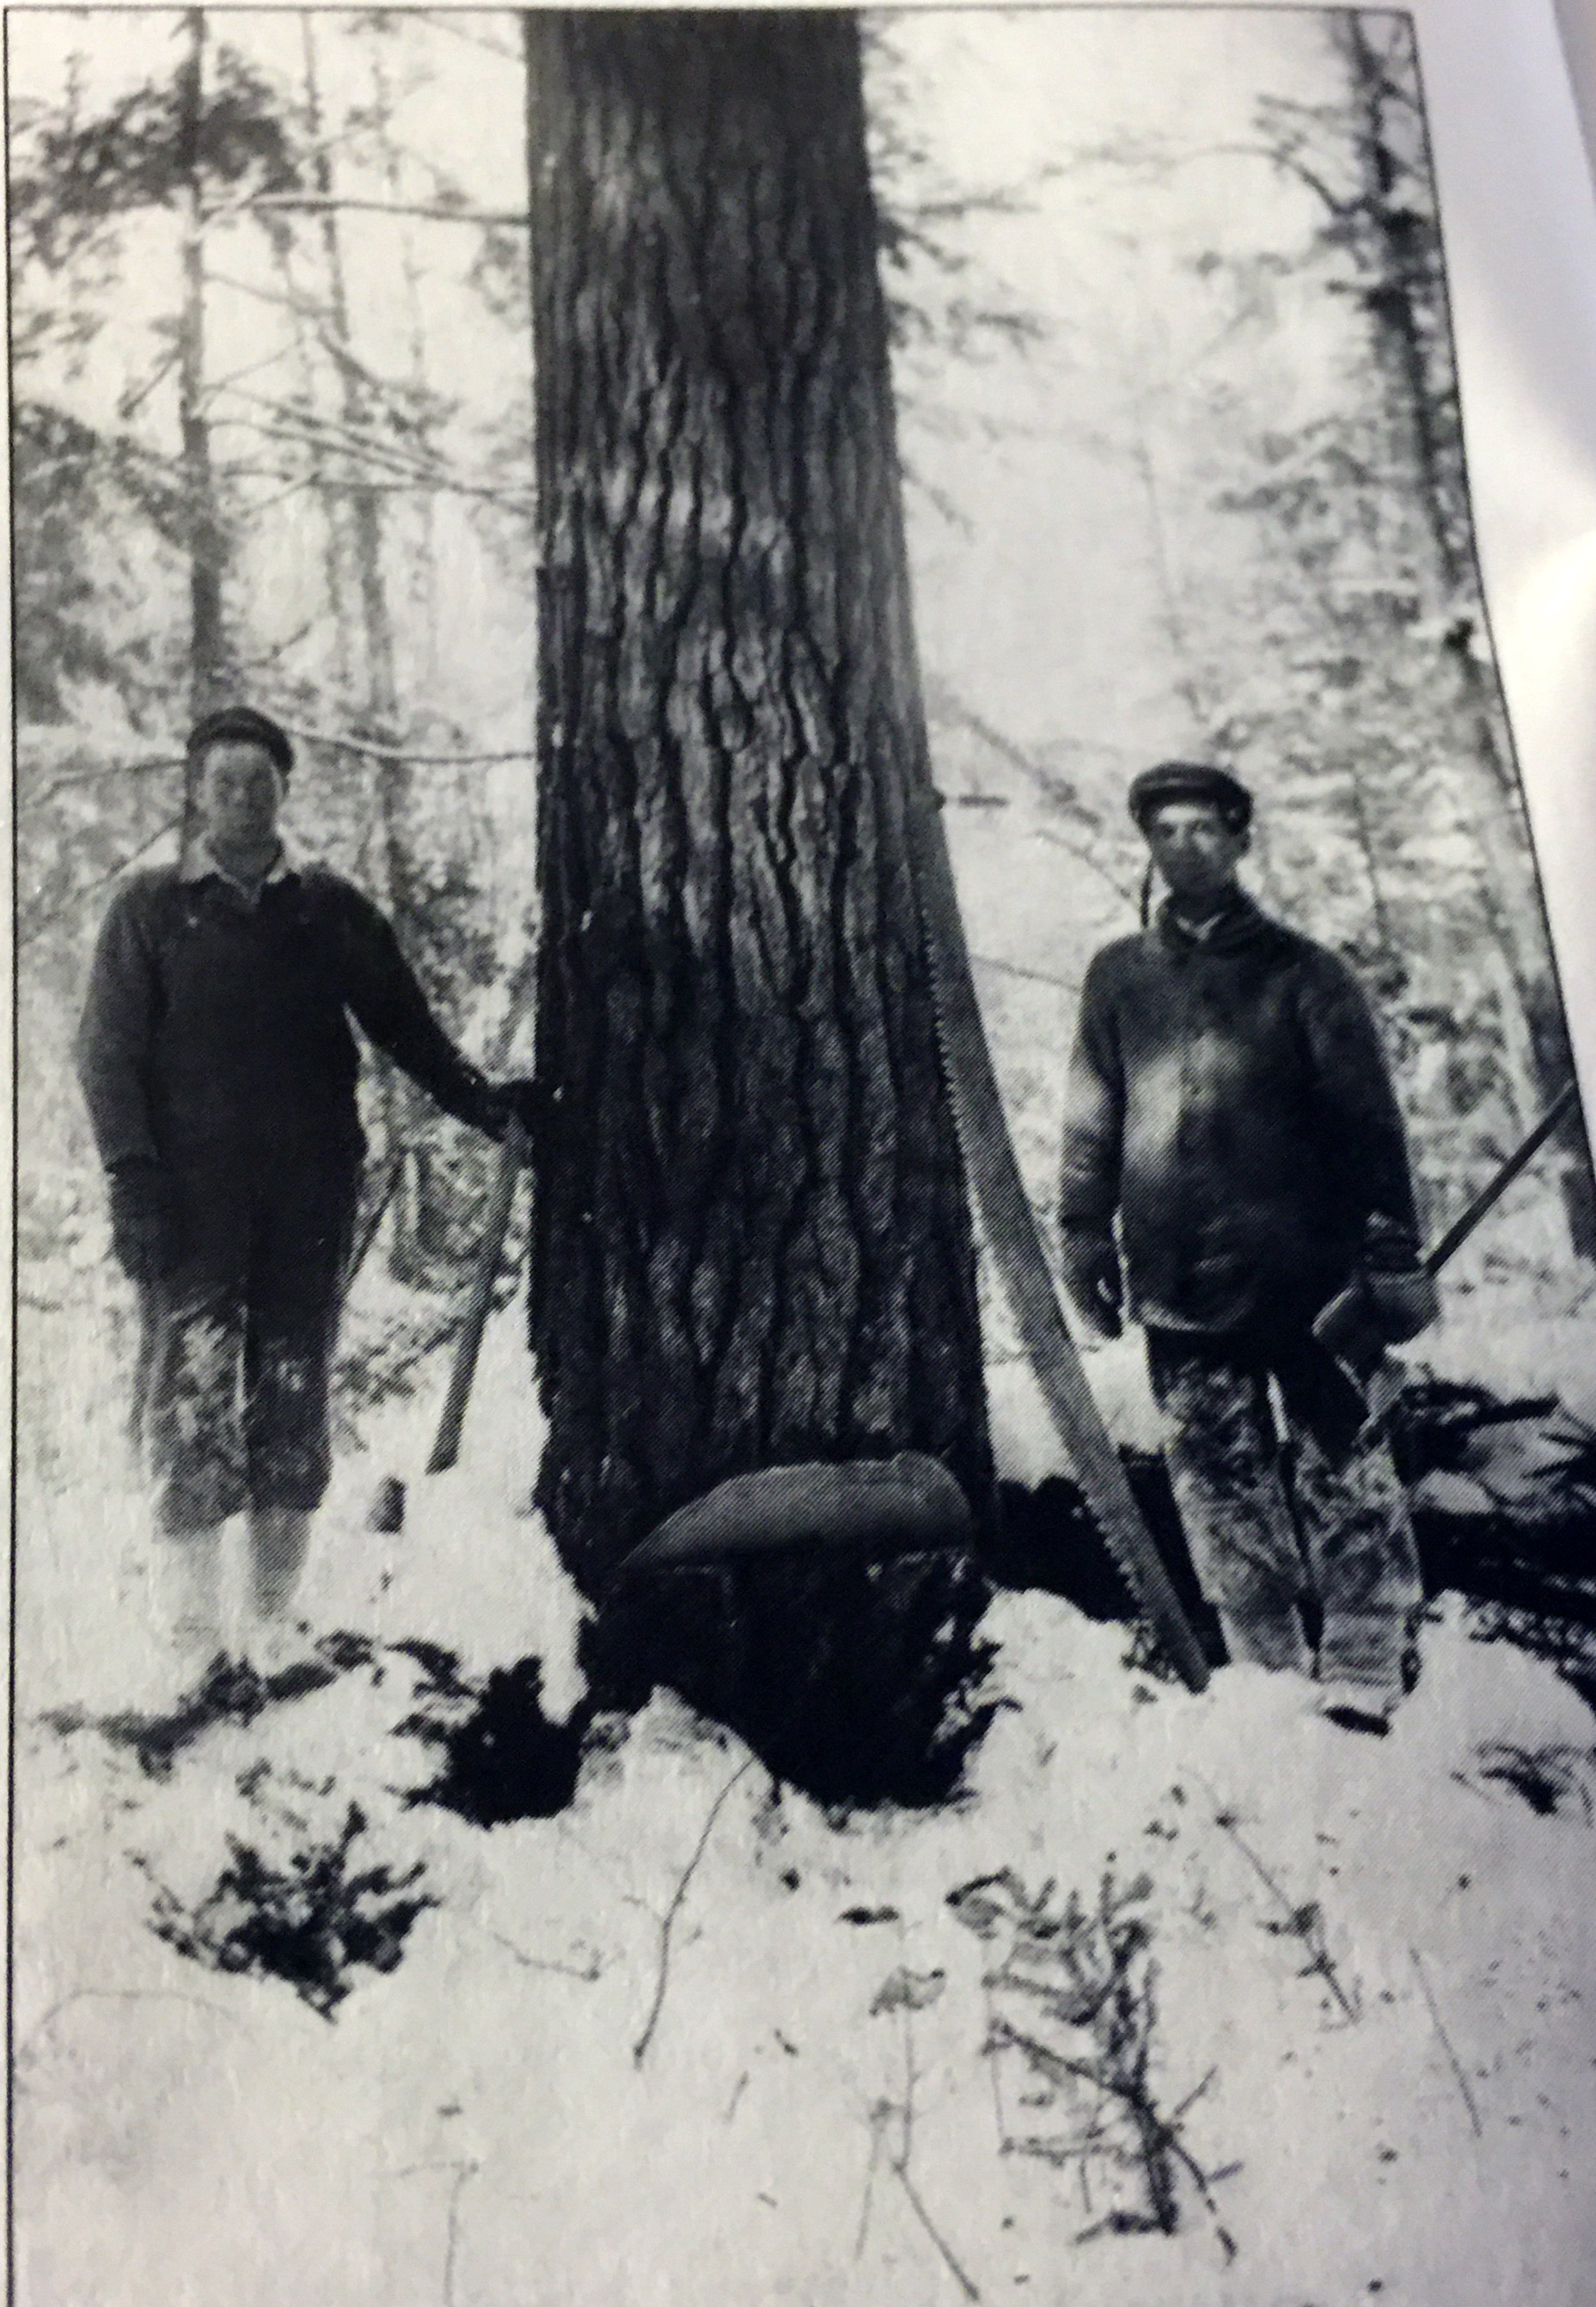 Ross Williams (left) and Clyde Morris (right) at Ward Camp, Lemon Lake  in 1905.